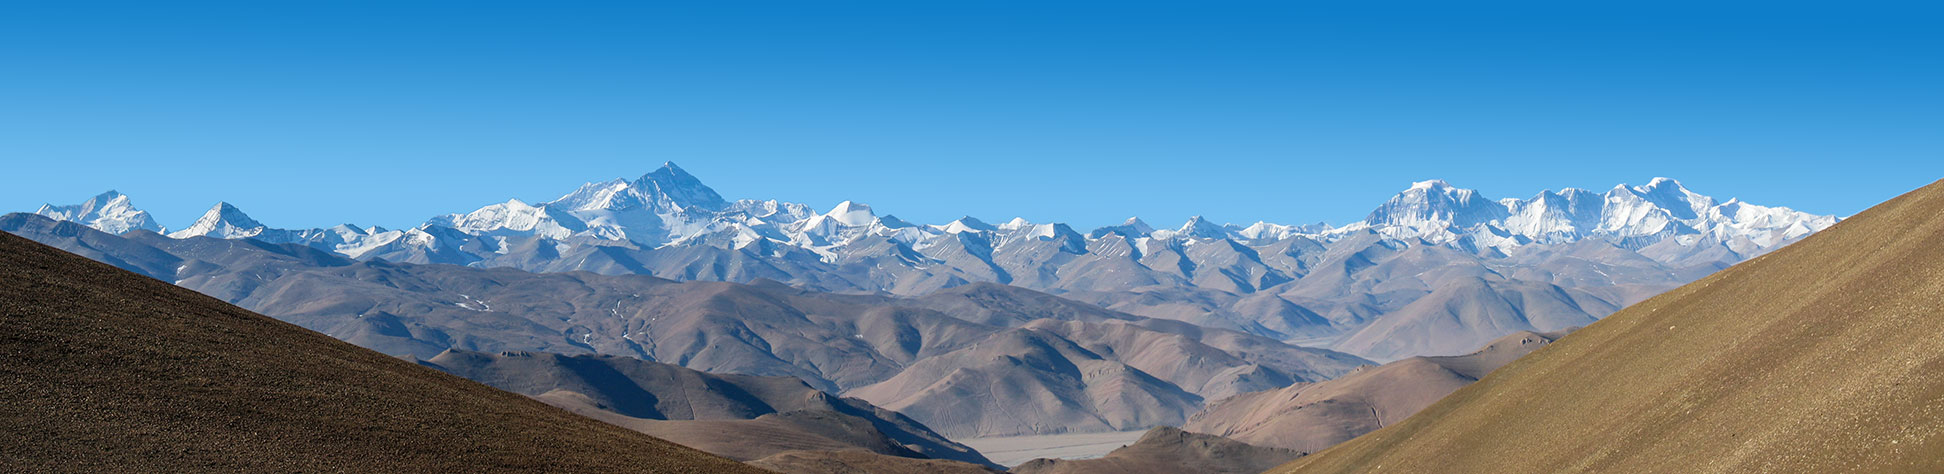 Panoramic view of the Himalayas with Mount Everest